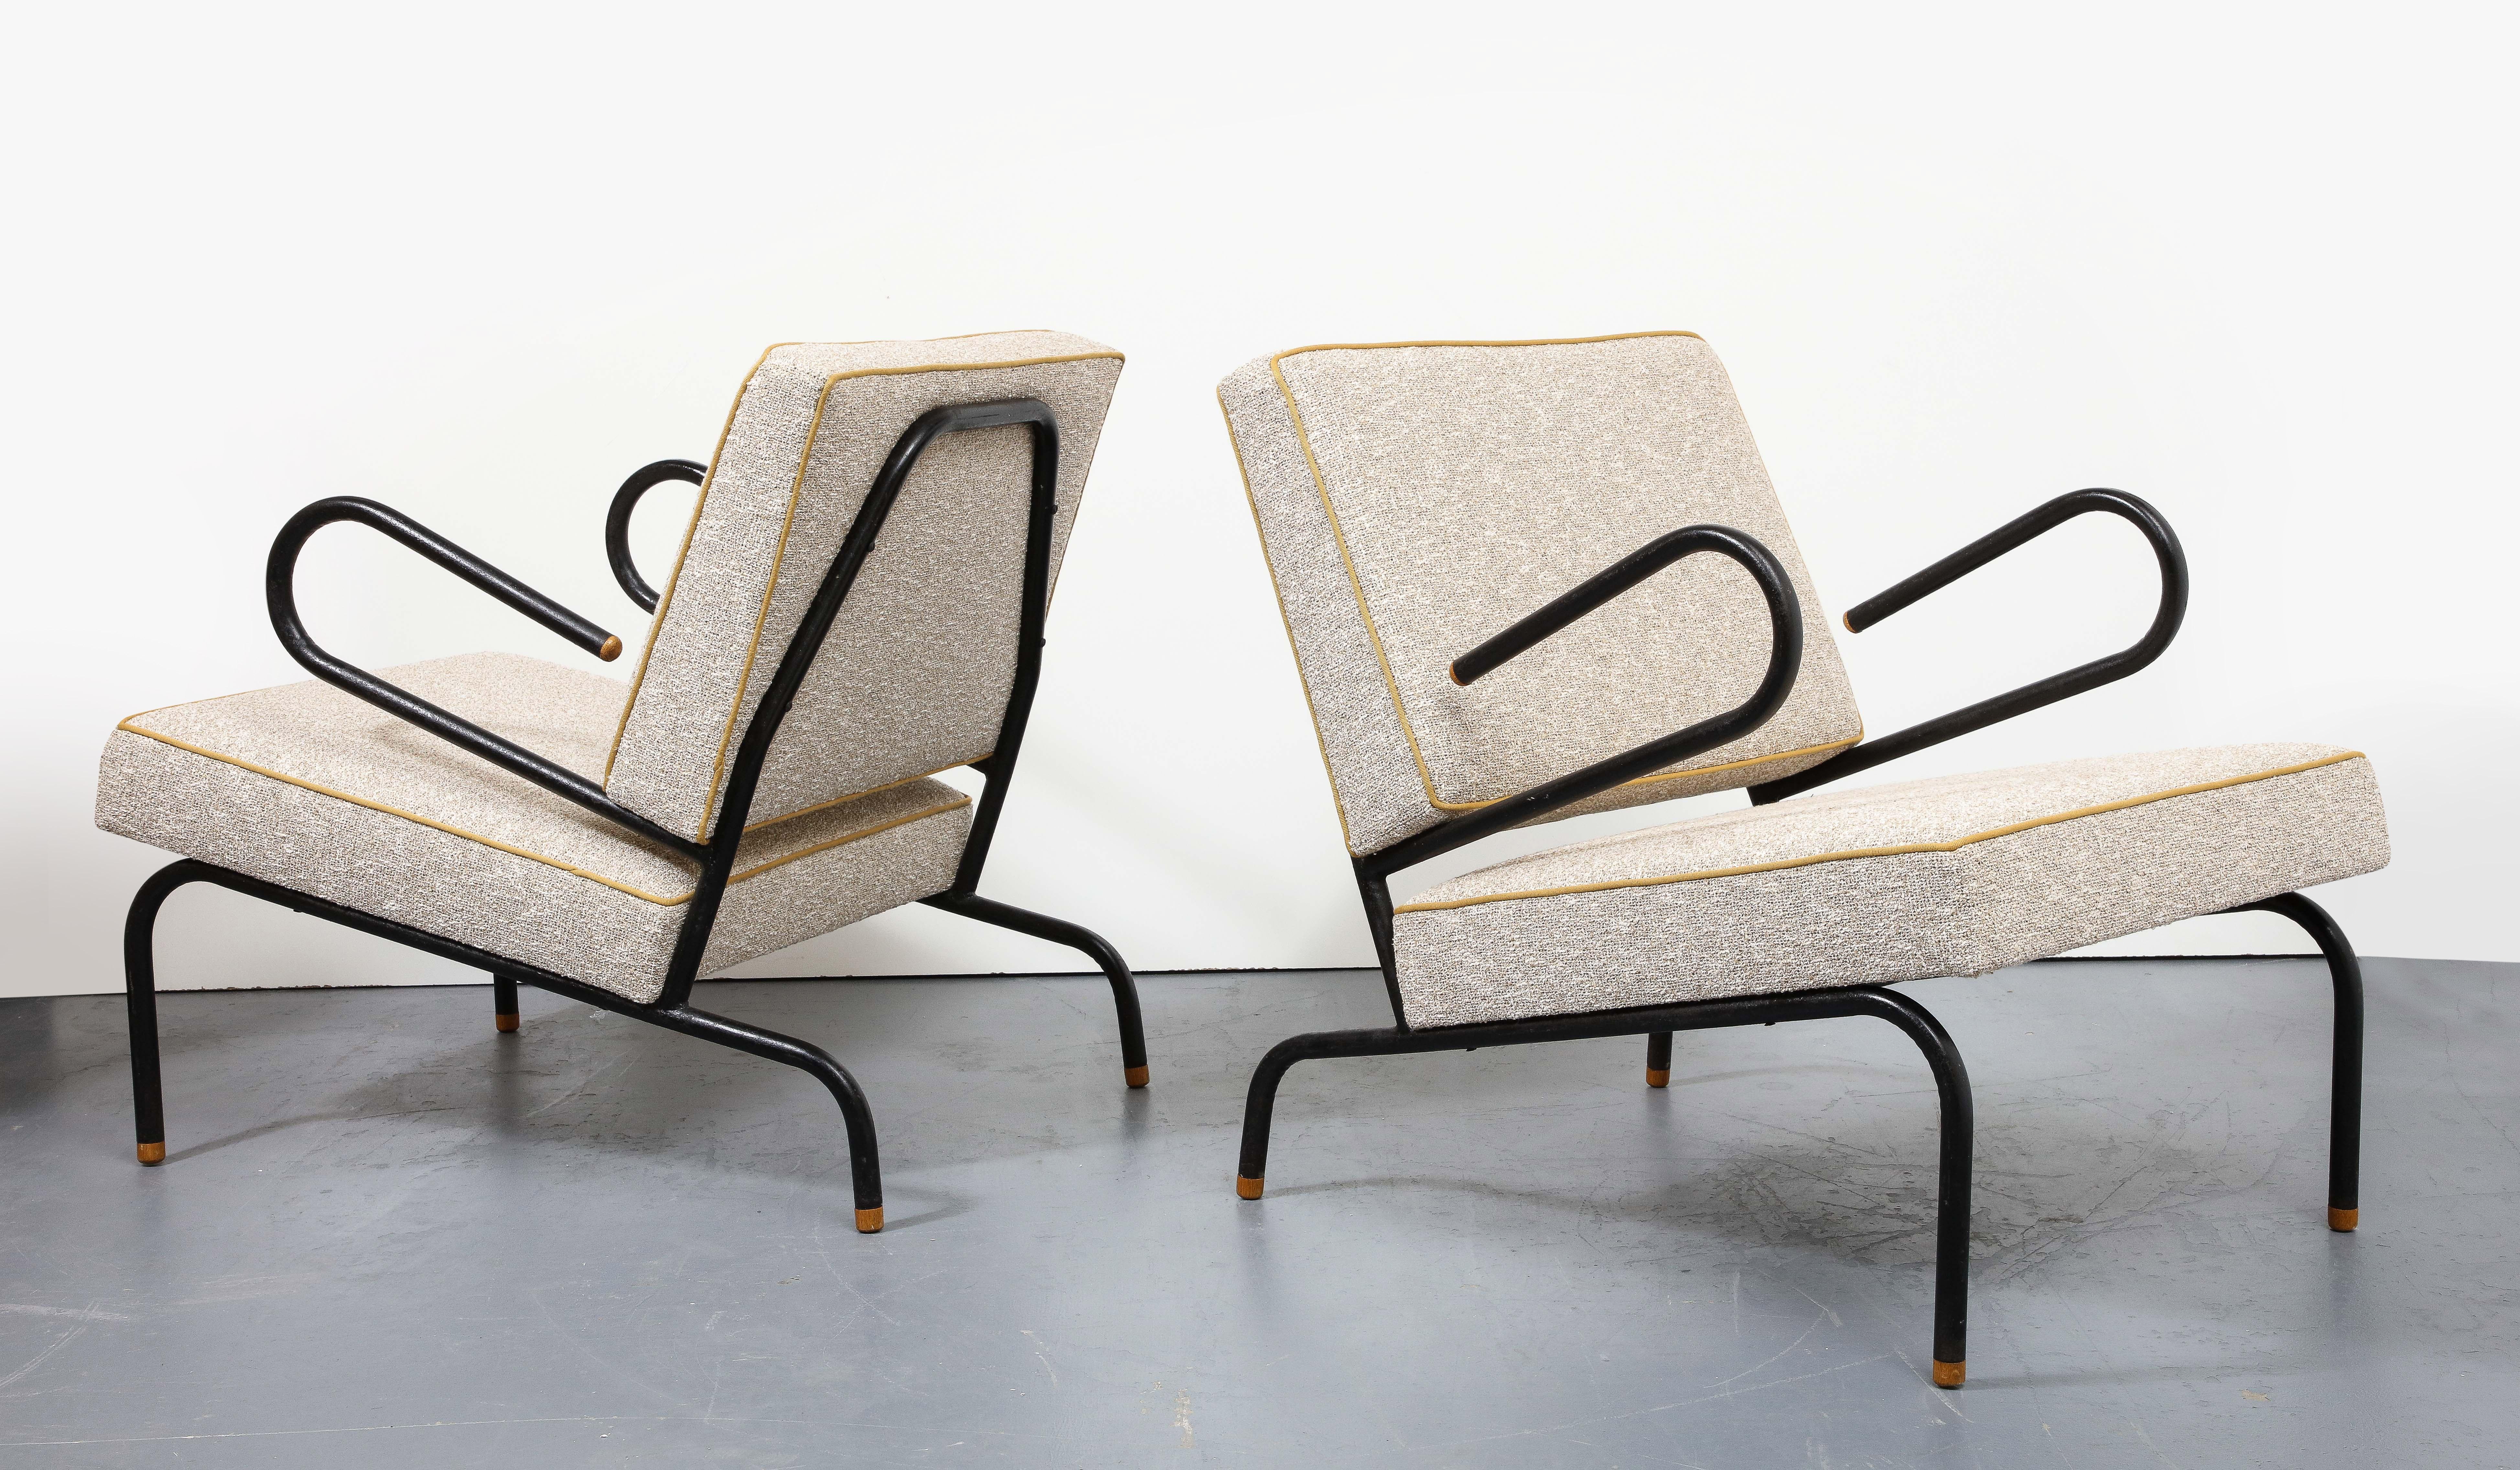 Two Available; Priced Individually

Graphic bent metal lounge chairs by celebrated architect and designer Jacques Hitier. These chairs are a great example of Hitier's design work.

The upholstery on these chairs is fresh, but not new. Springs and